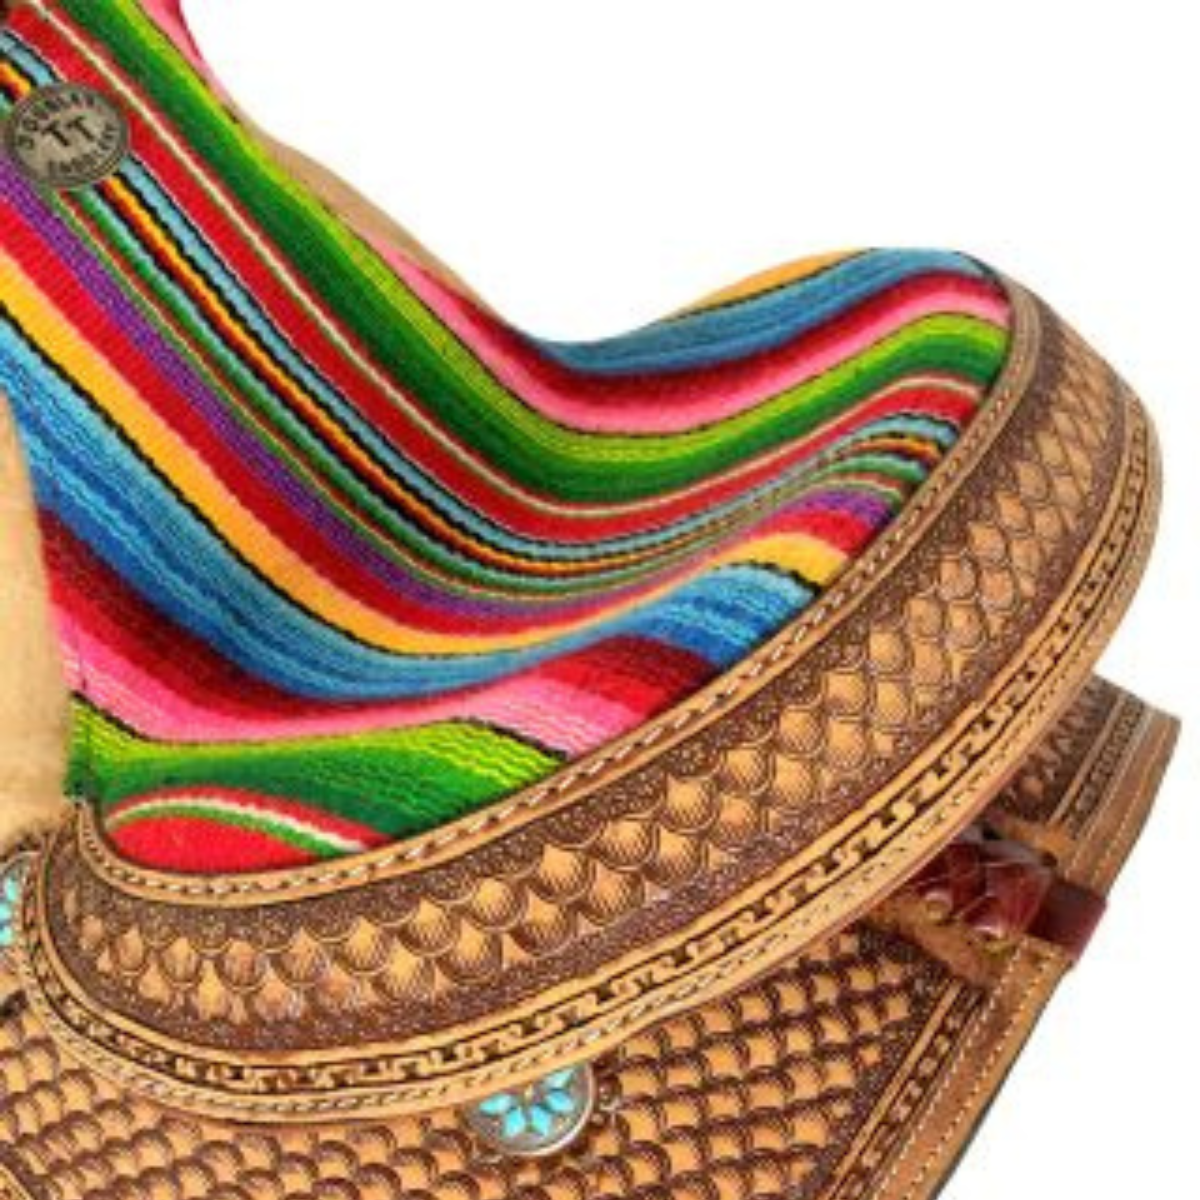 15" Double T  Youth Hard Seat Western saddle with Wool Serape Accents. - Double T Saddles